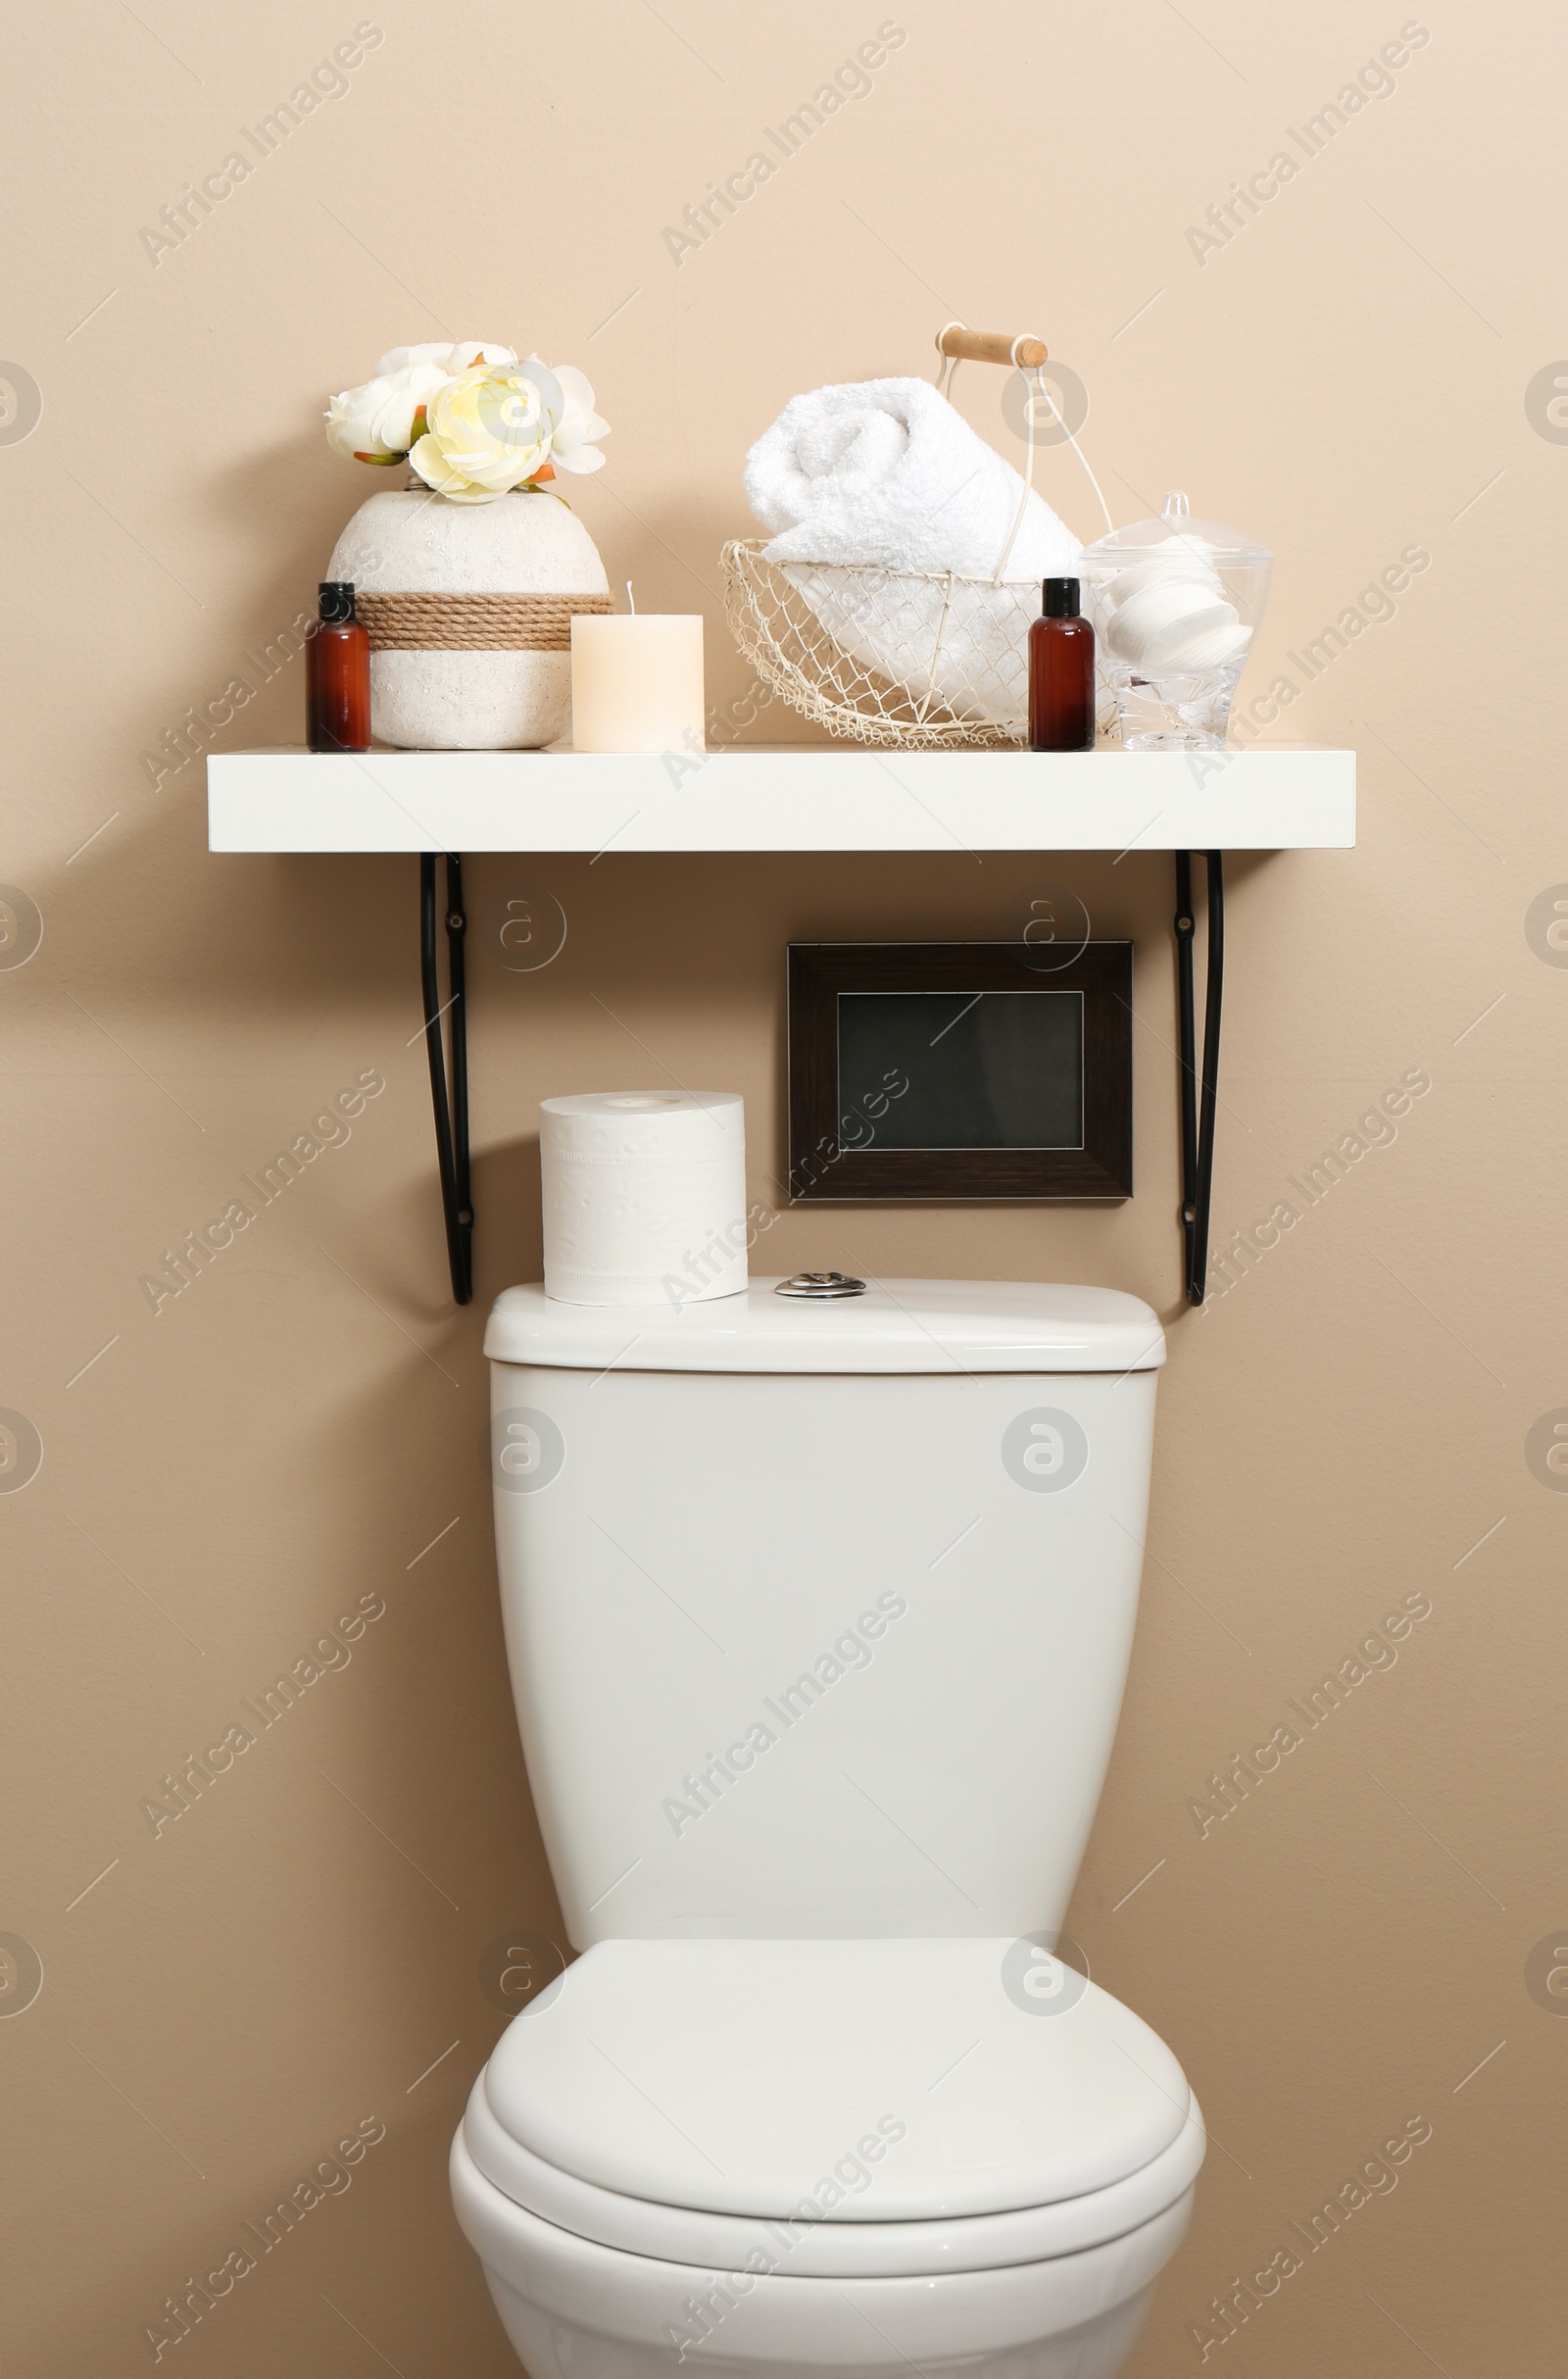 Photo of Shelf with different stuff on beige wall above toilet bowl in restroom interior